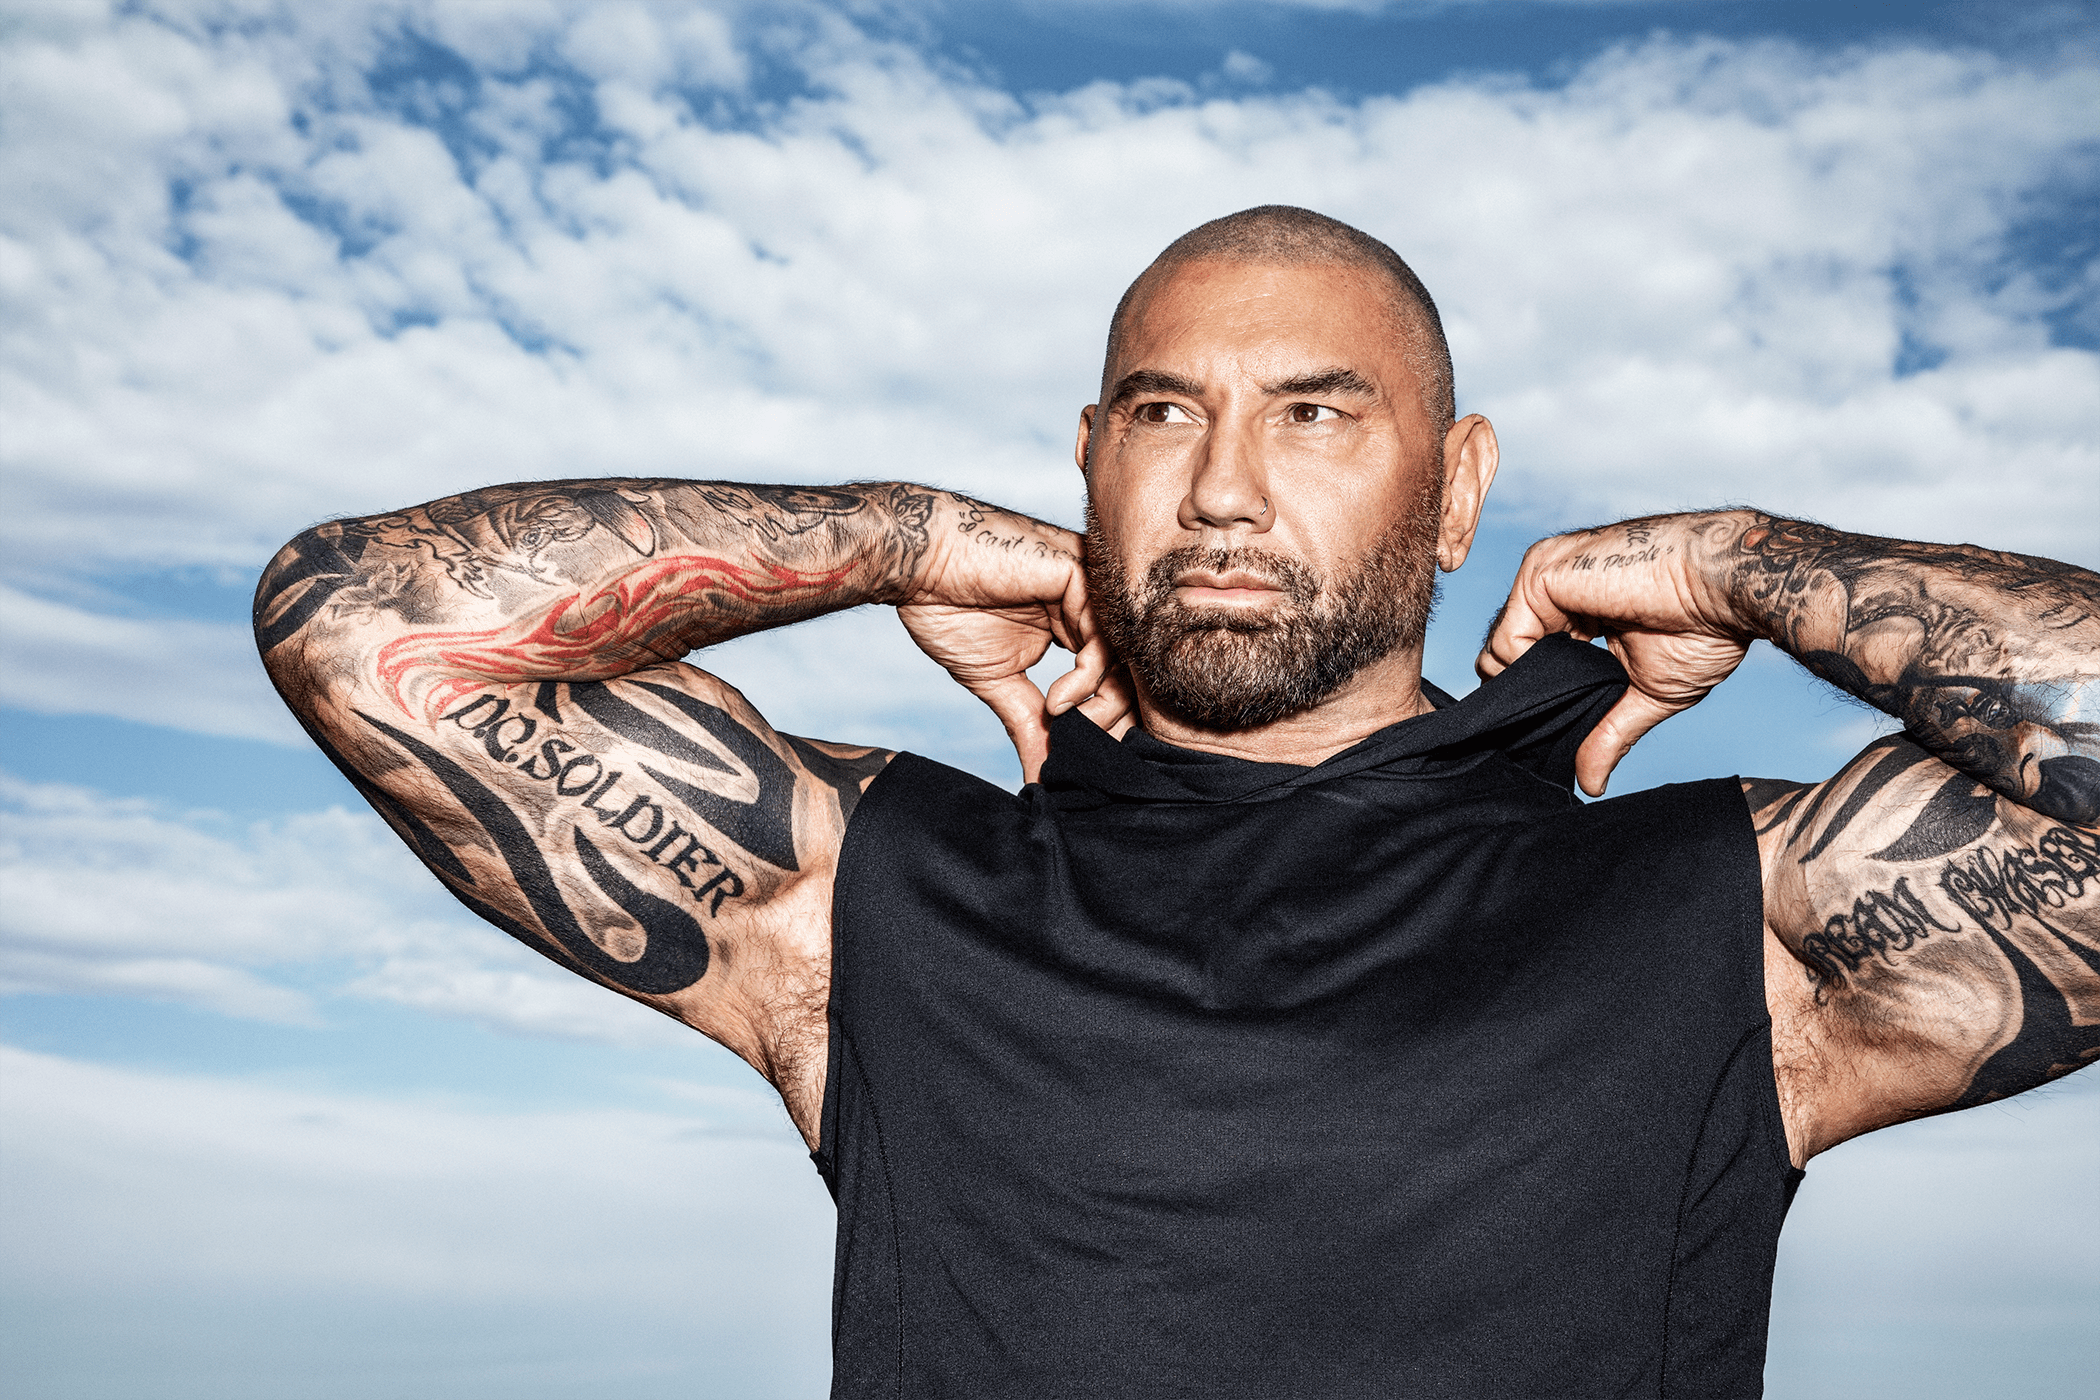 Friendship over Dave Bautista reveals cover up of Pacquiao tattoo